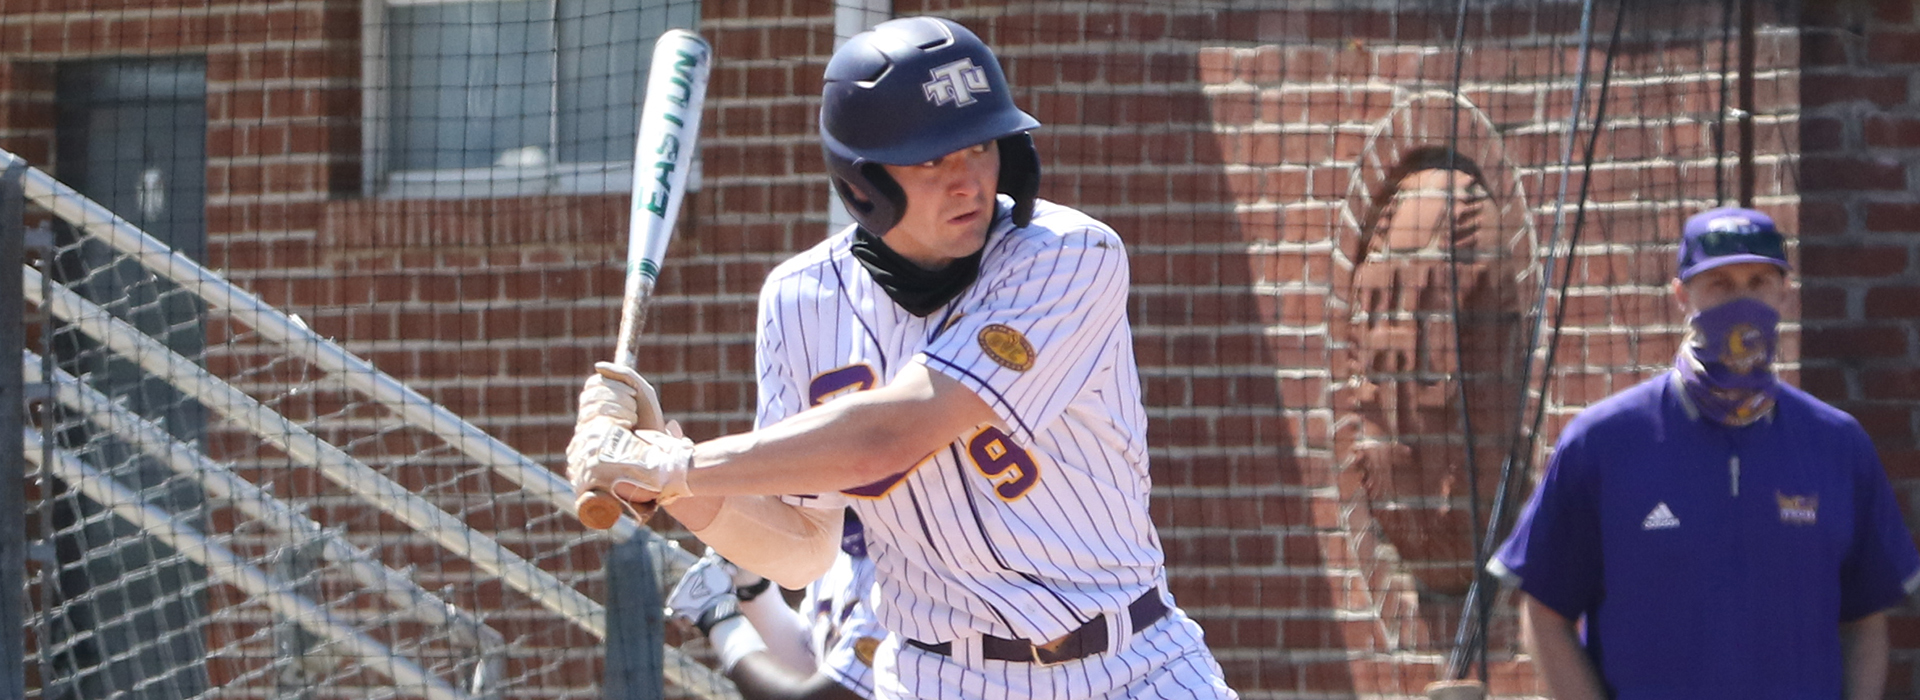 Huge week at the dish propels Johnson to OVC Player of the Week nod